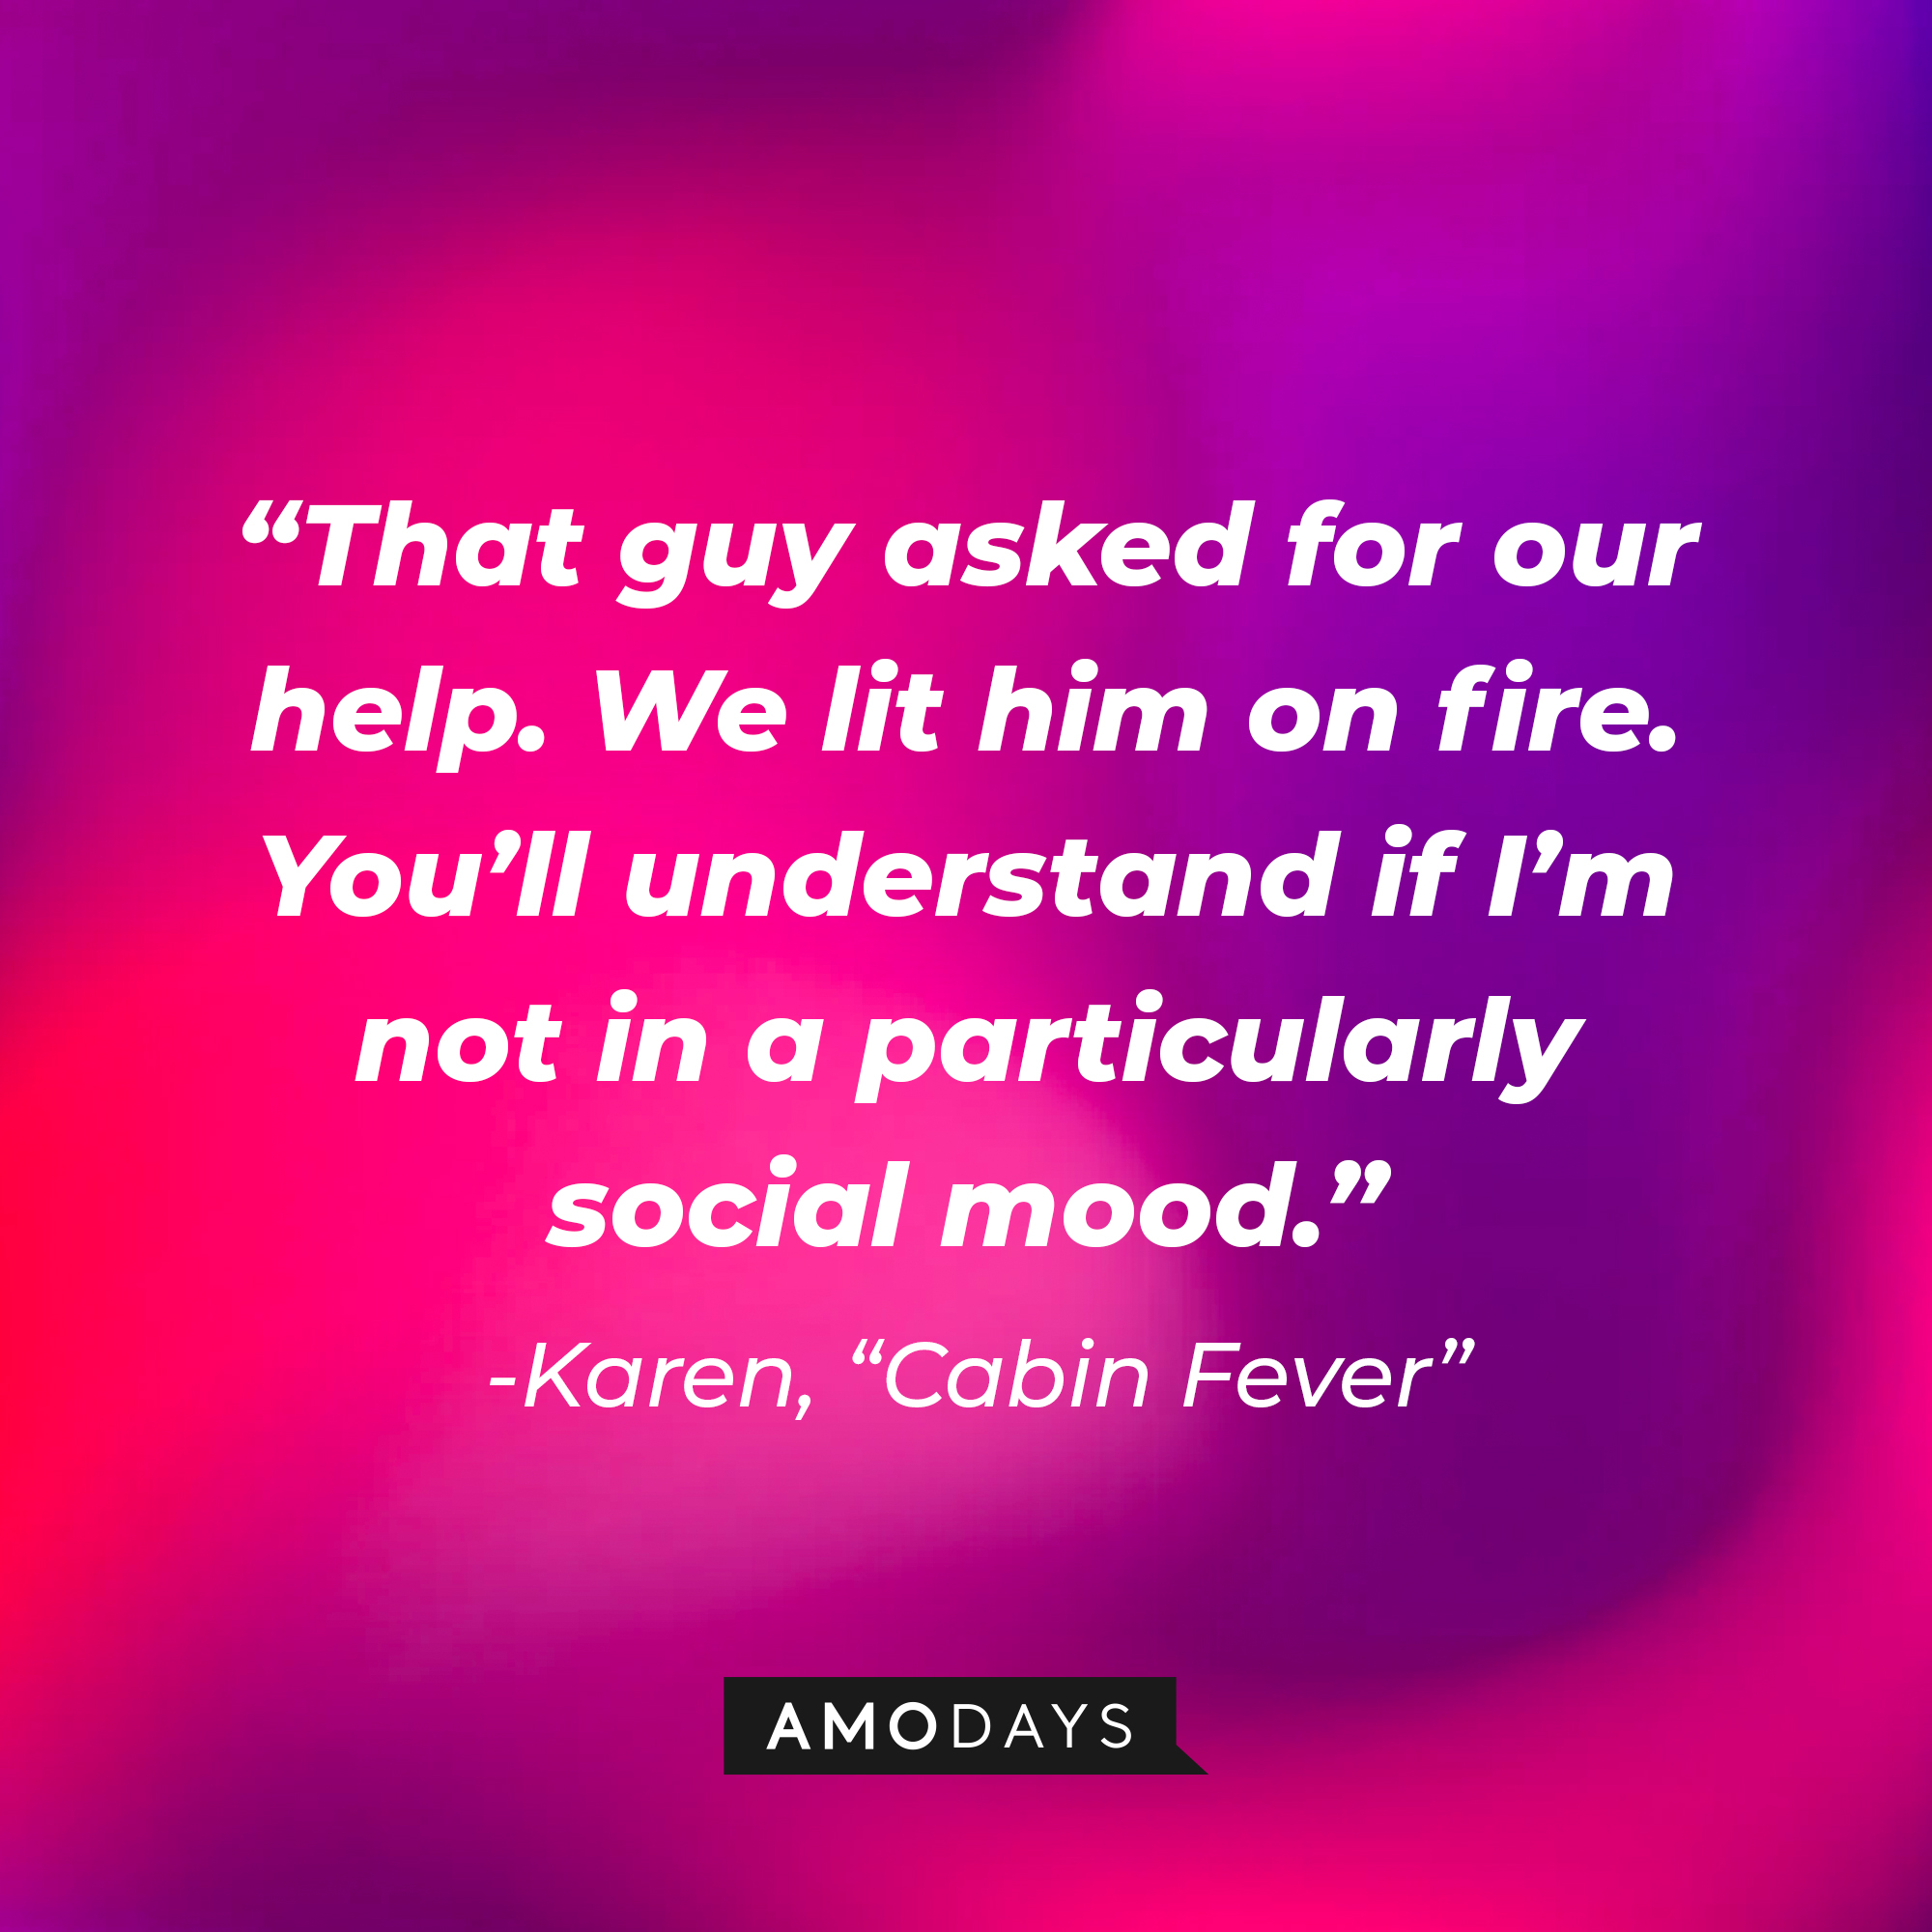 Karen's quote from "Cabin Fever:" “That guy asked for our help. We lit him on fire. You’ll understand if I’m not in a particularly social mood.” | Source: AmoDays